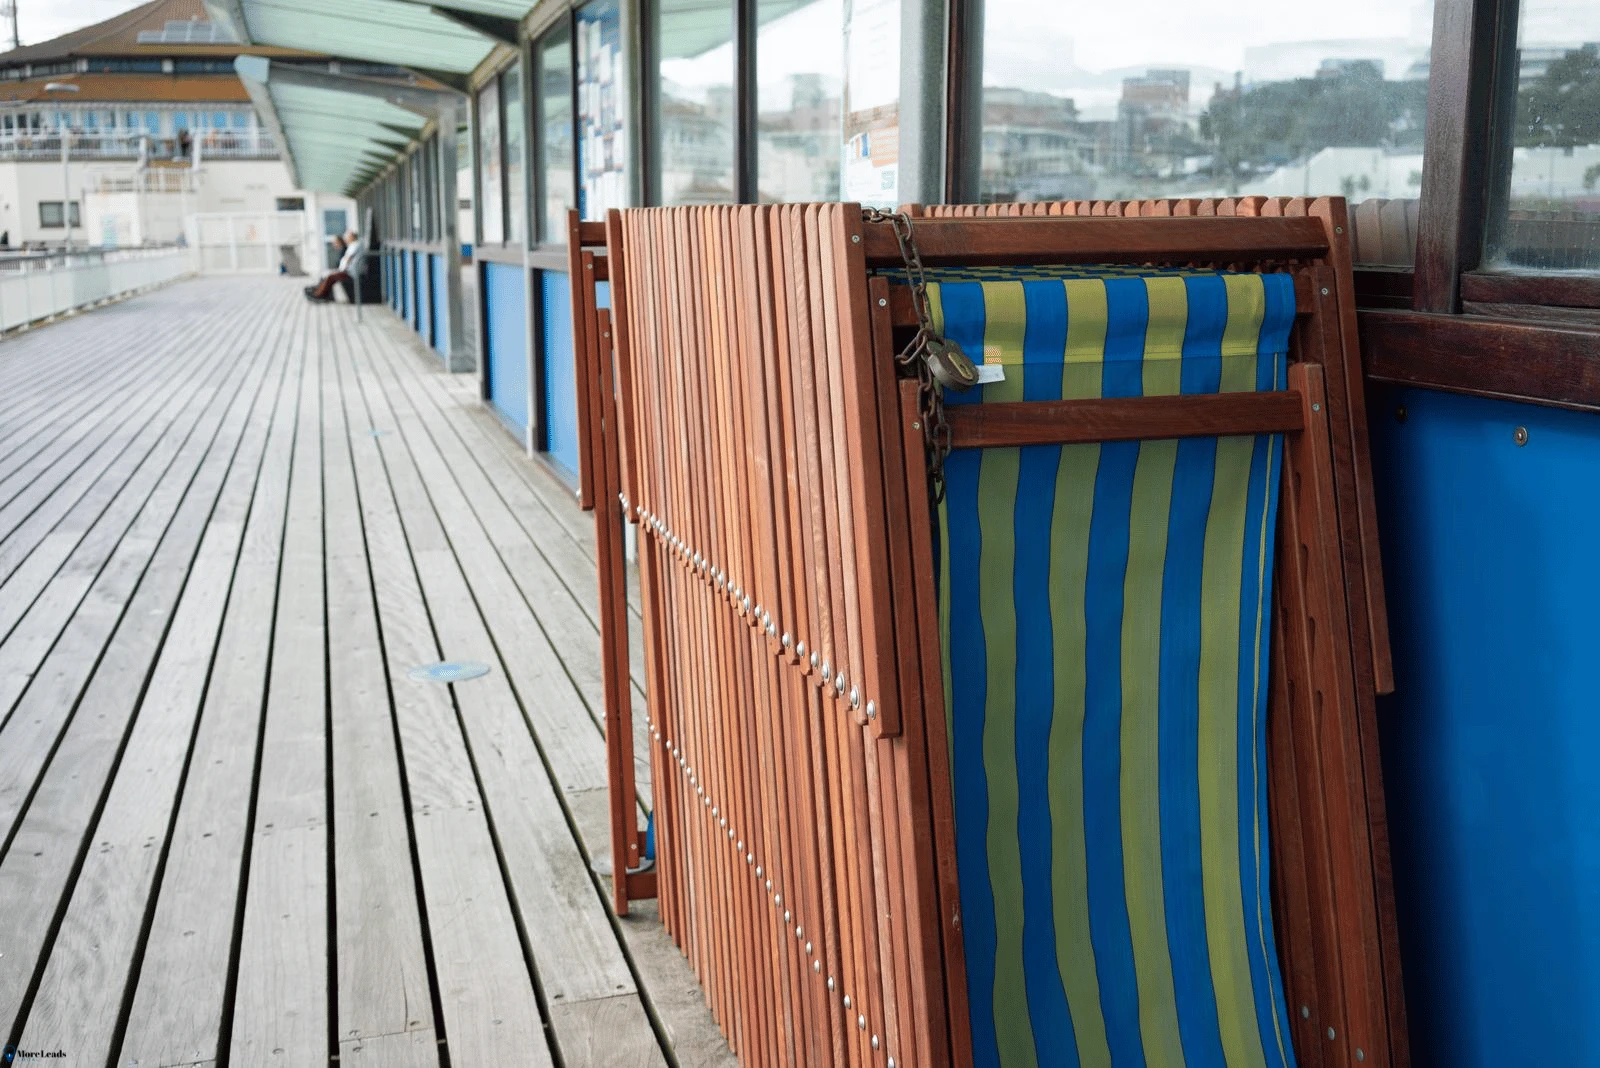 More Leads Local with Deck Chairs on Bournemouth Pier - Bringing SEO to businesses in Bournemouth.